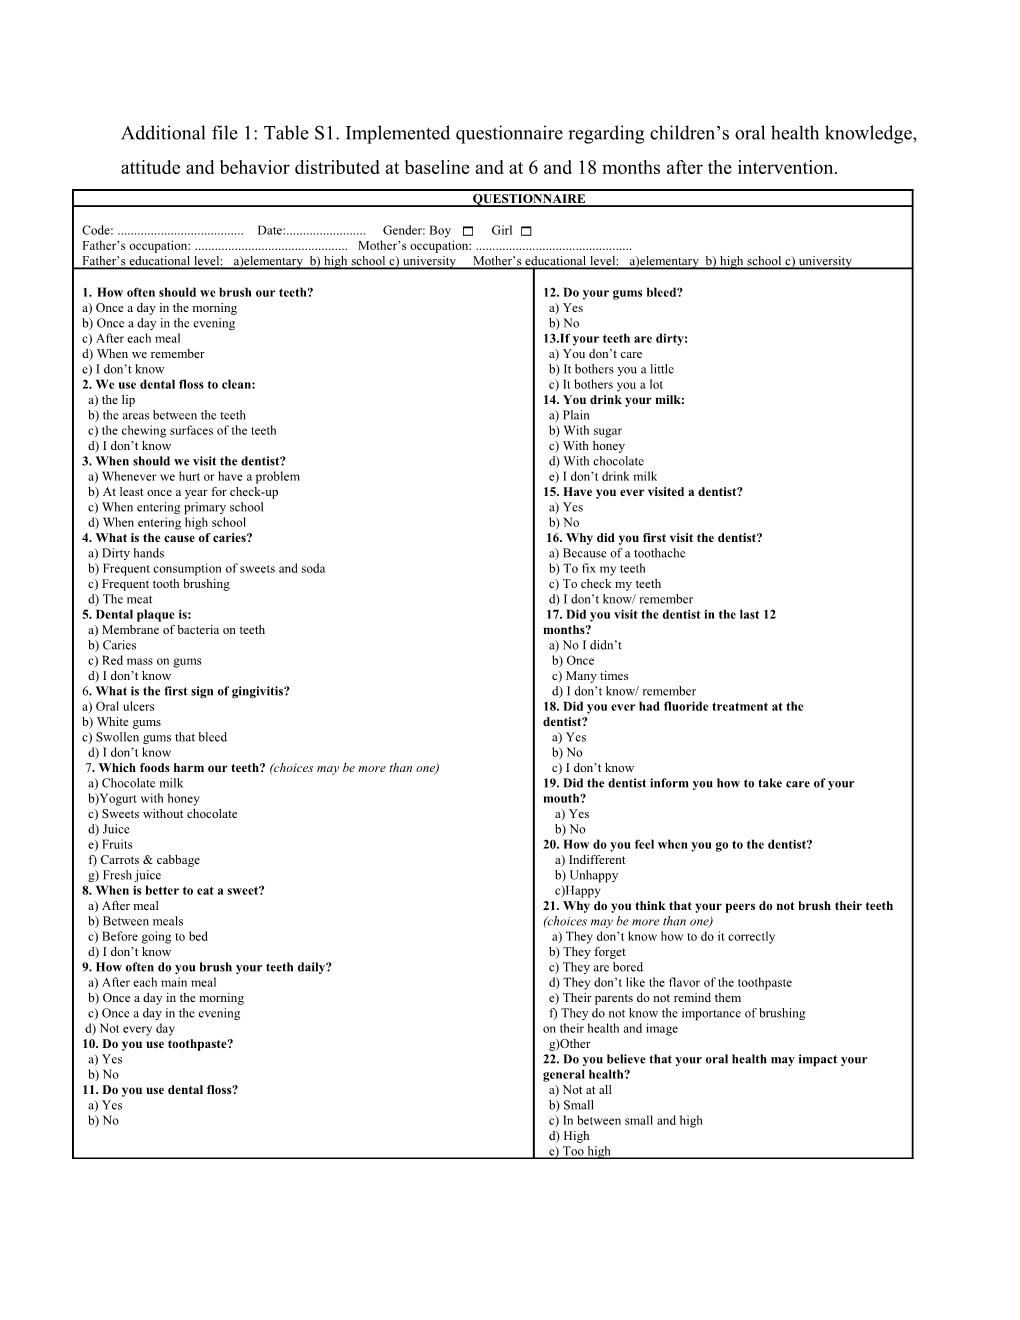 Additional File 1: Table S1. Implemented Questionnaire Regarding Children S Oral Health